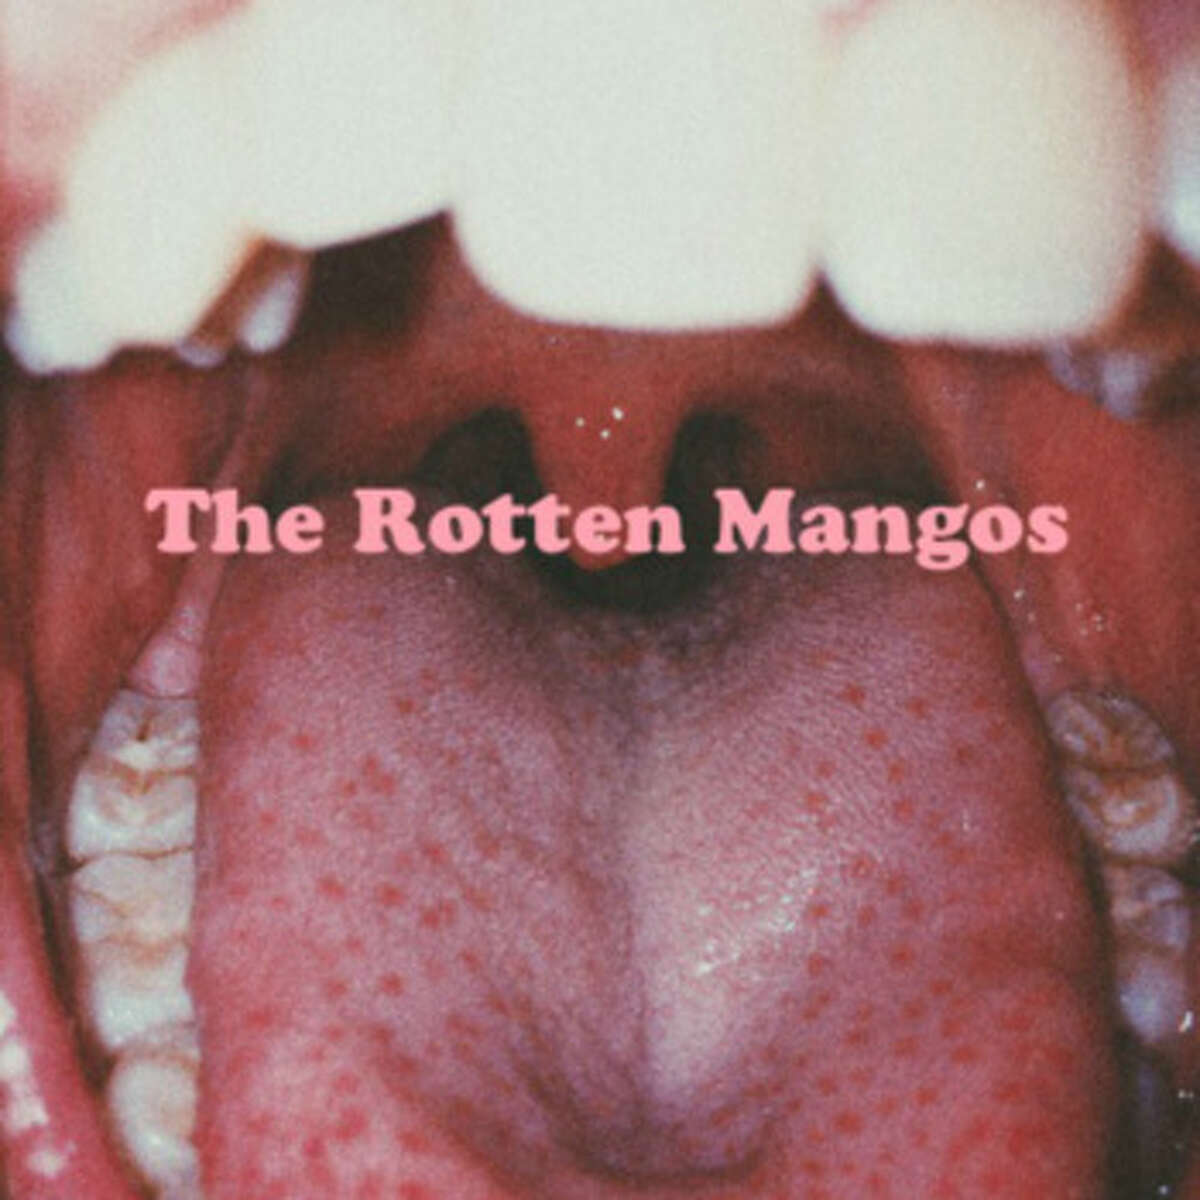 Their Facebook pages says they come "from a planet far away made entirely of smelly old heaps of rotten fruits (predominately mangos)." Actually, the Rotten Mangos were born in McAllen and relocated to Austin. Touring behind their debut EL (pictured), the Rotten Mangos head a wild and wooly bill that also include the garage-rocking Lochness Mobsters (from Austin by way of Louisiana) and San Antonio bands Fishbrain, Flower Jesus and DJ Proper Yarn.9 p.m. Monday, Hi-Tones, 621 E. Dewey Place. $3.-- Robert Johnson